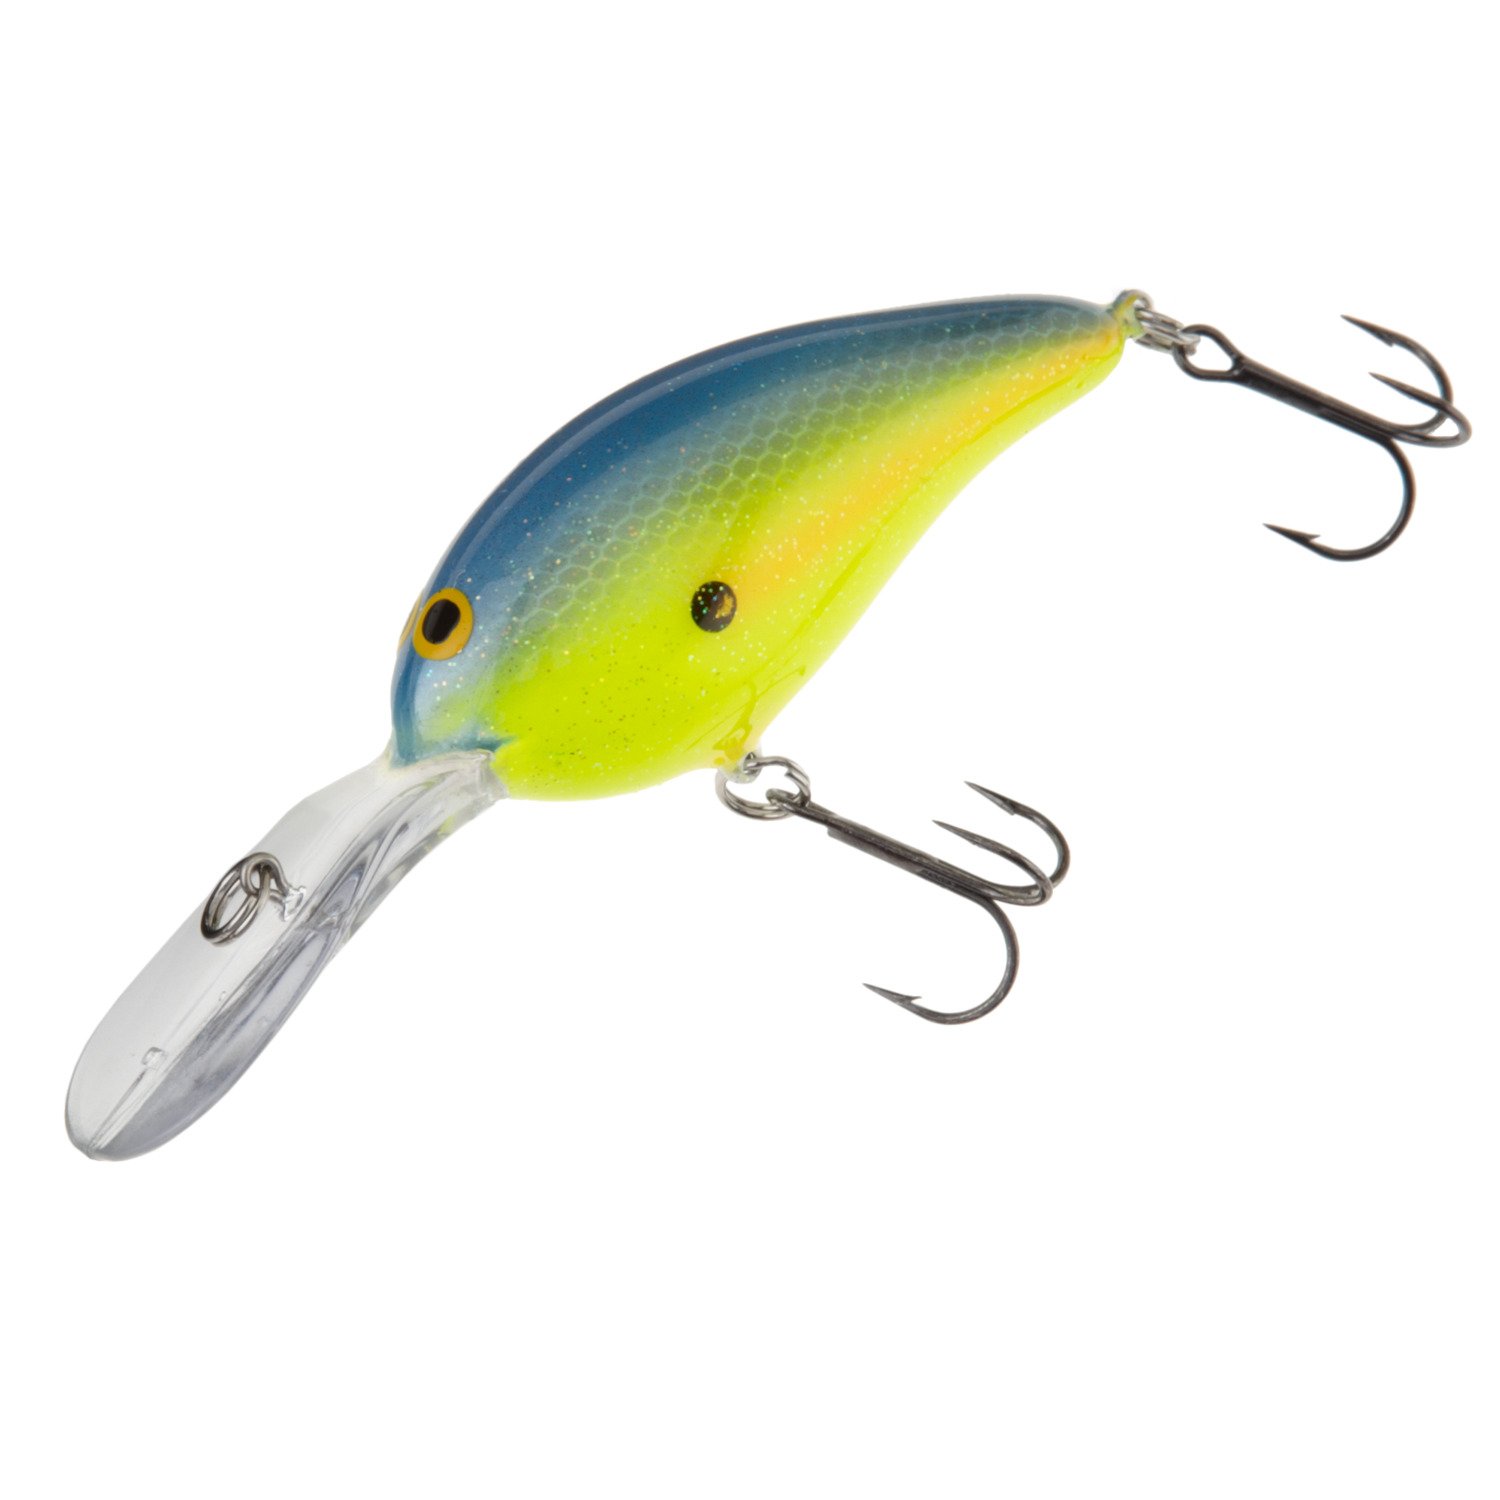 Norman Lures Speed Clips